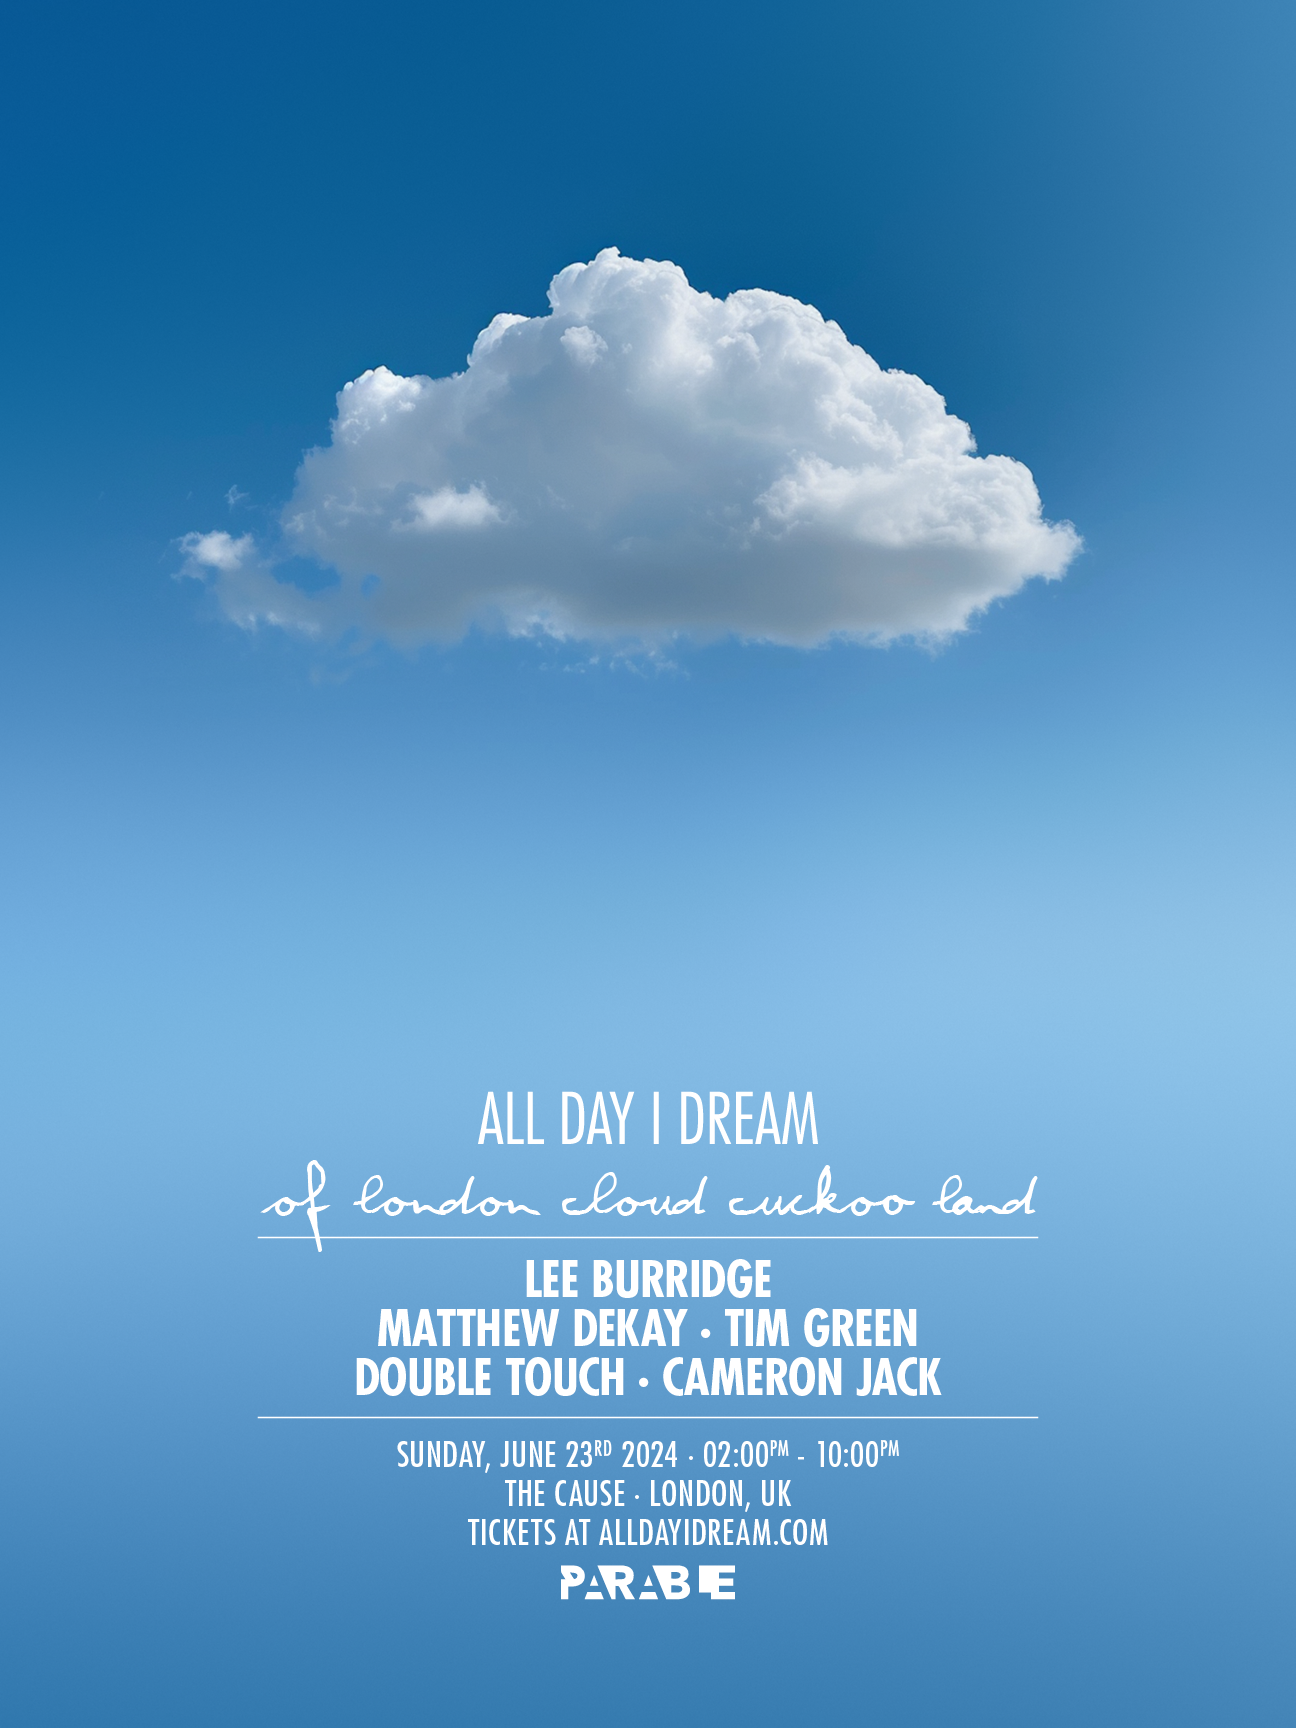 All Day I Dream...of London cloud cuckoo land - フライヤー表